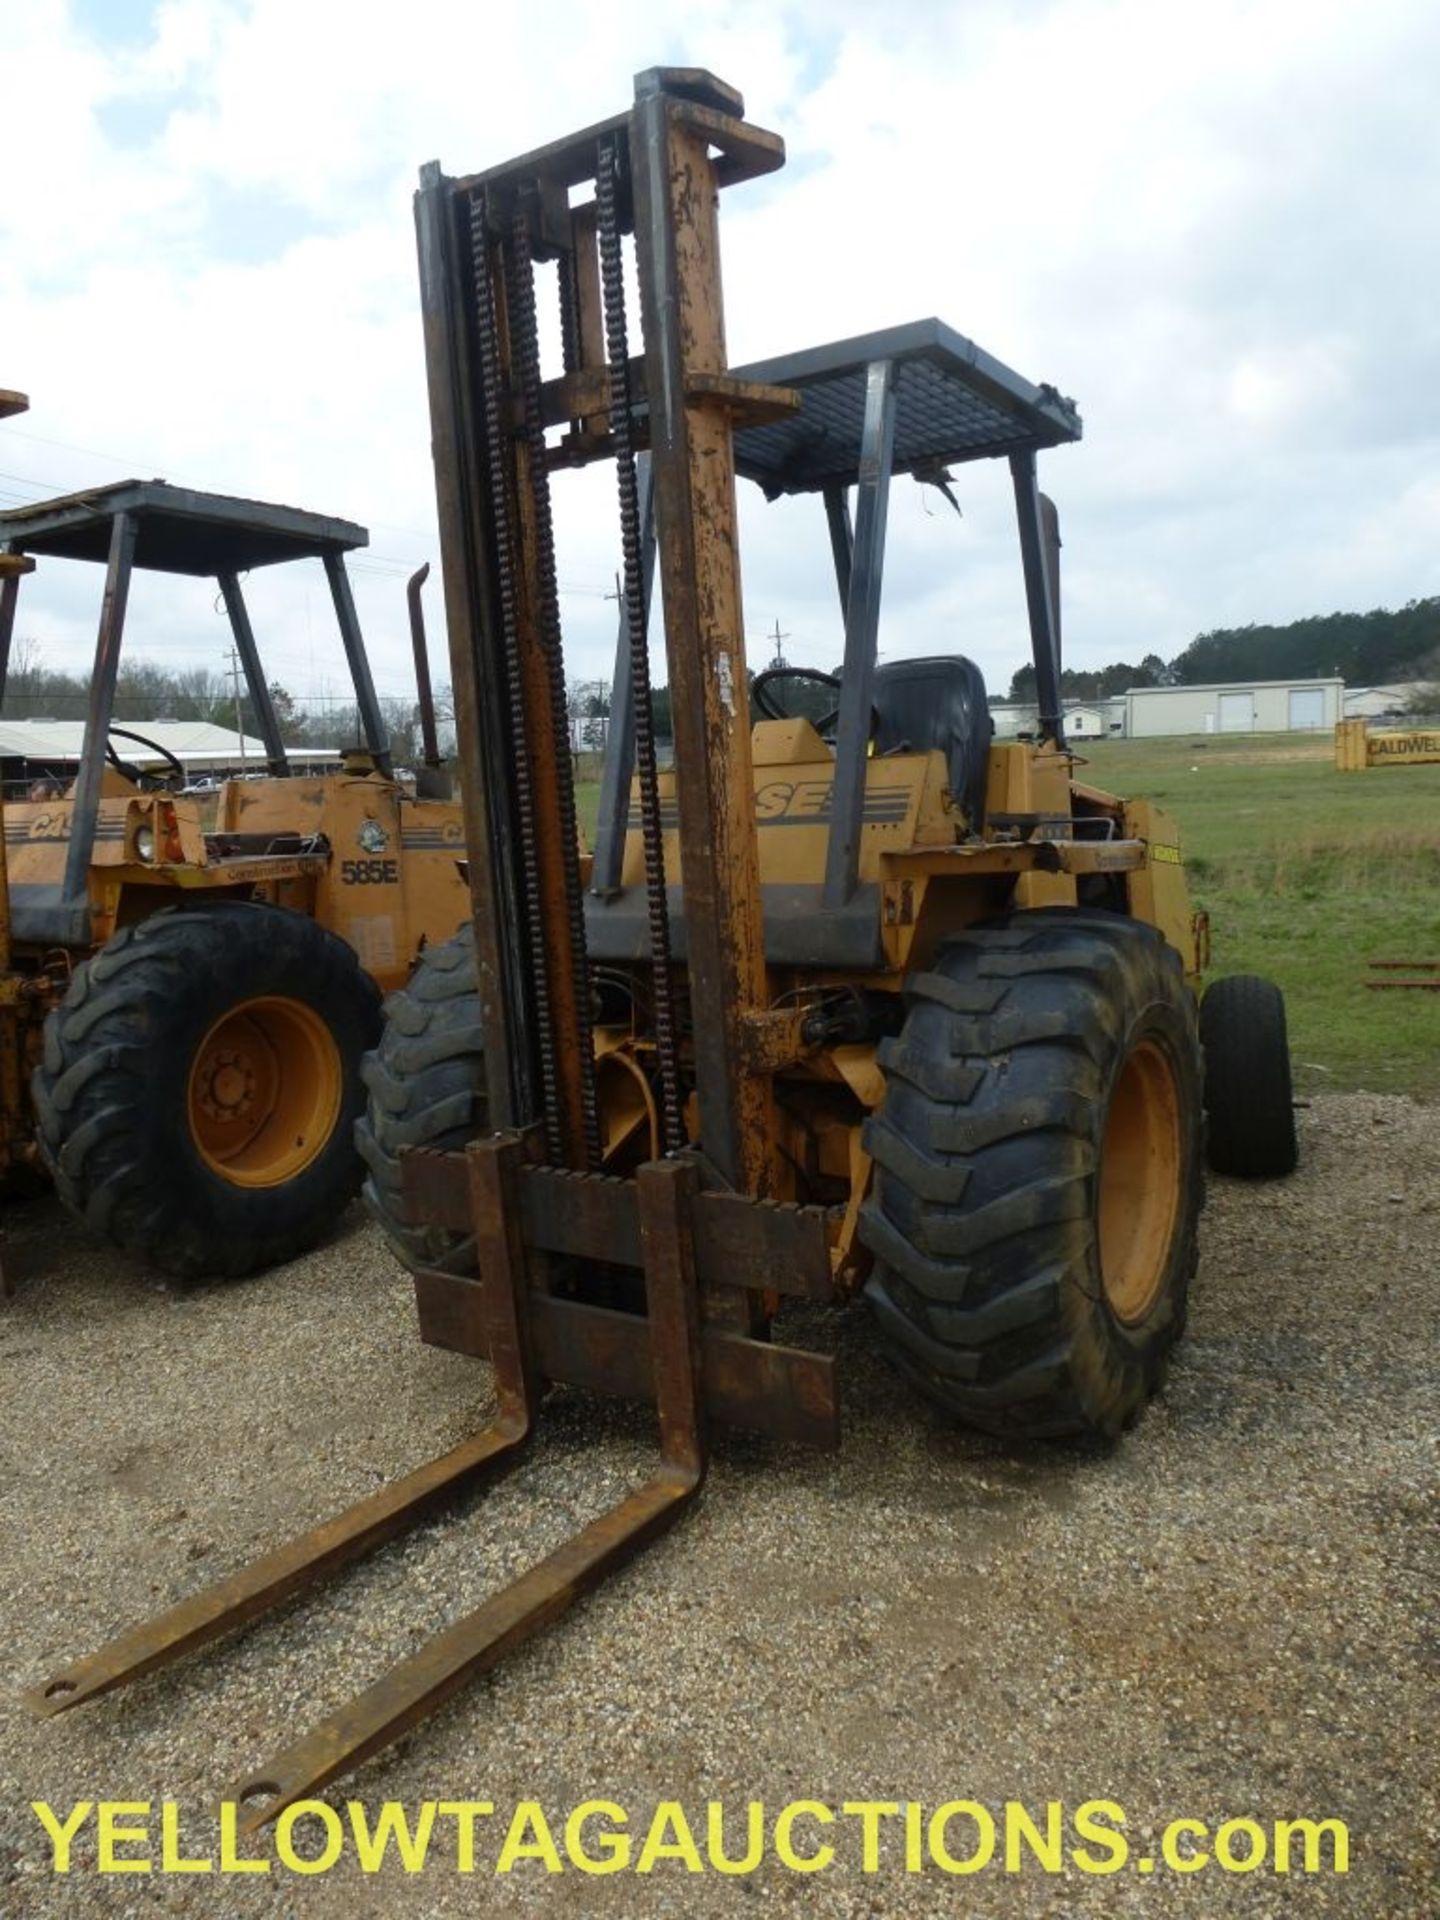 Case Diesel Forklift|Model No. 586E; Prod. ID No. JJG0252053; Truck Weight: 14,000 lbs; Capacity: